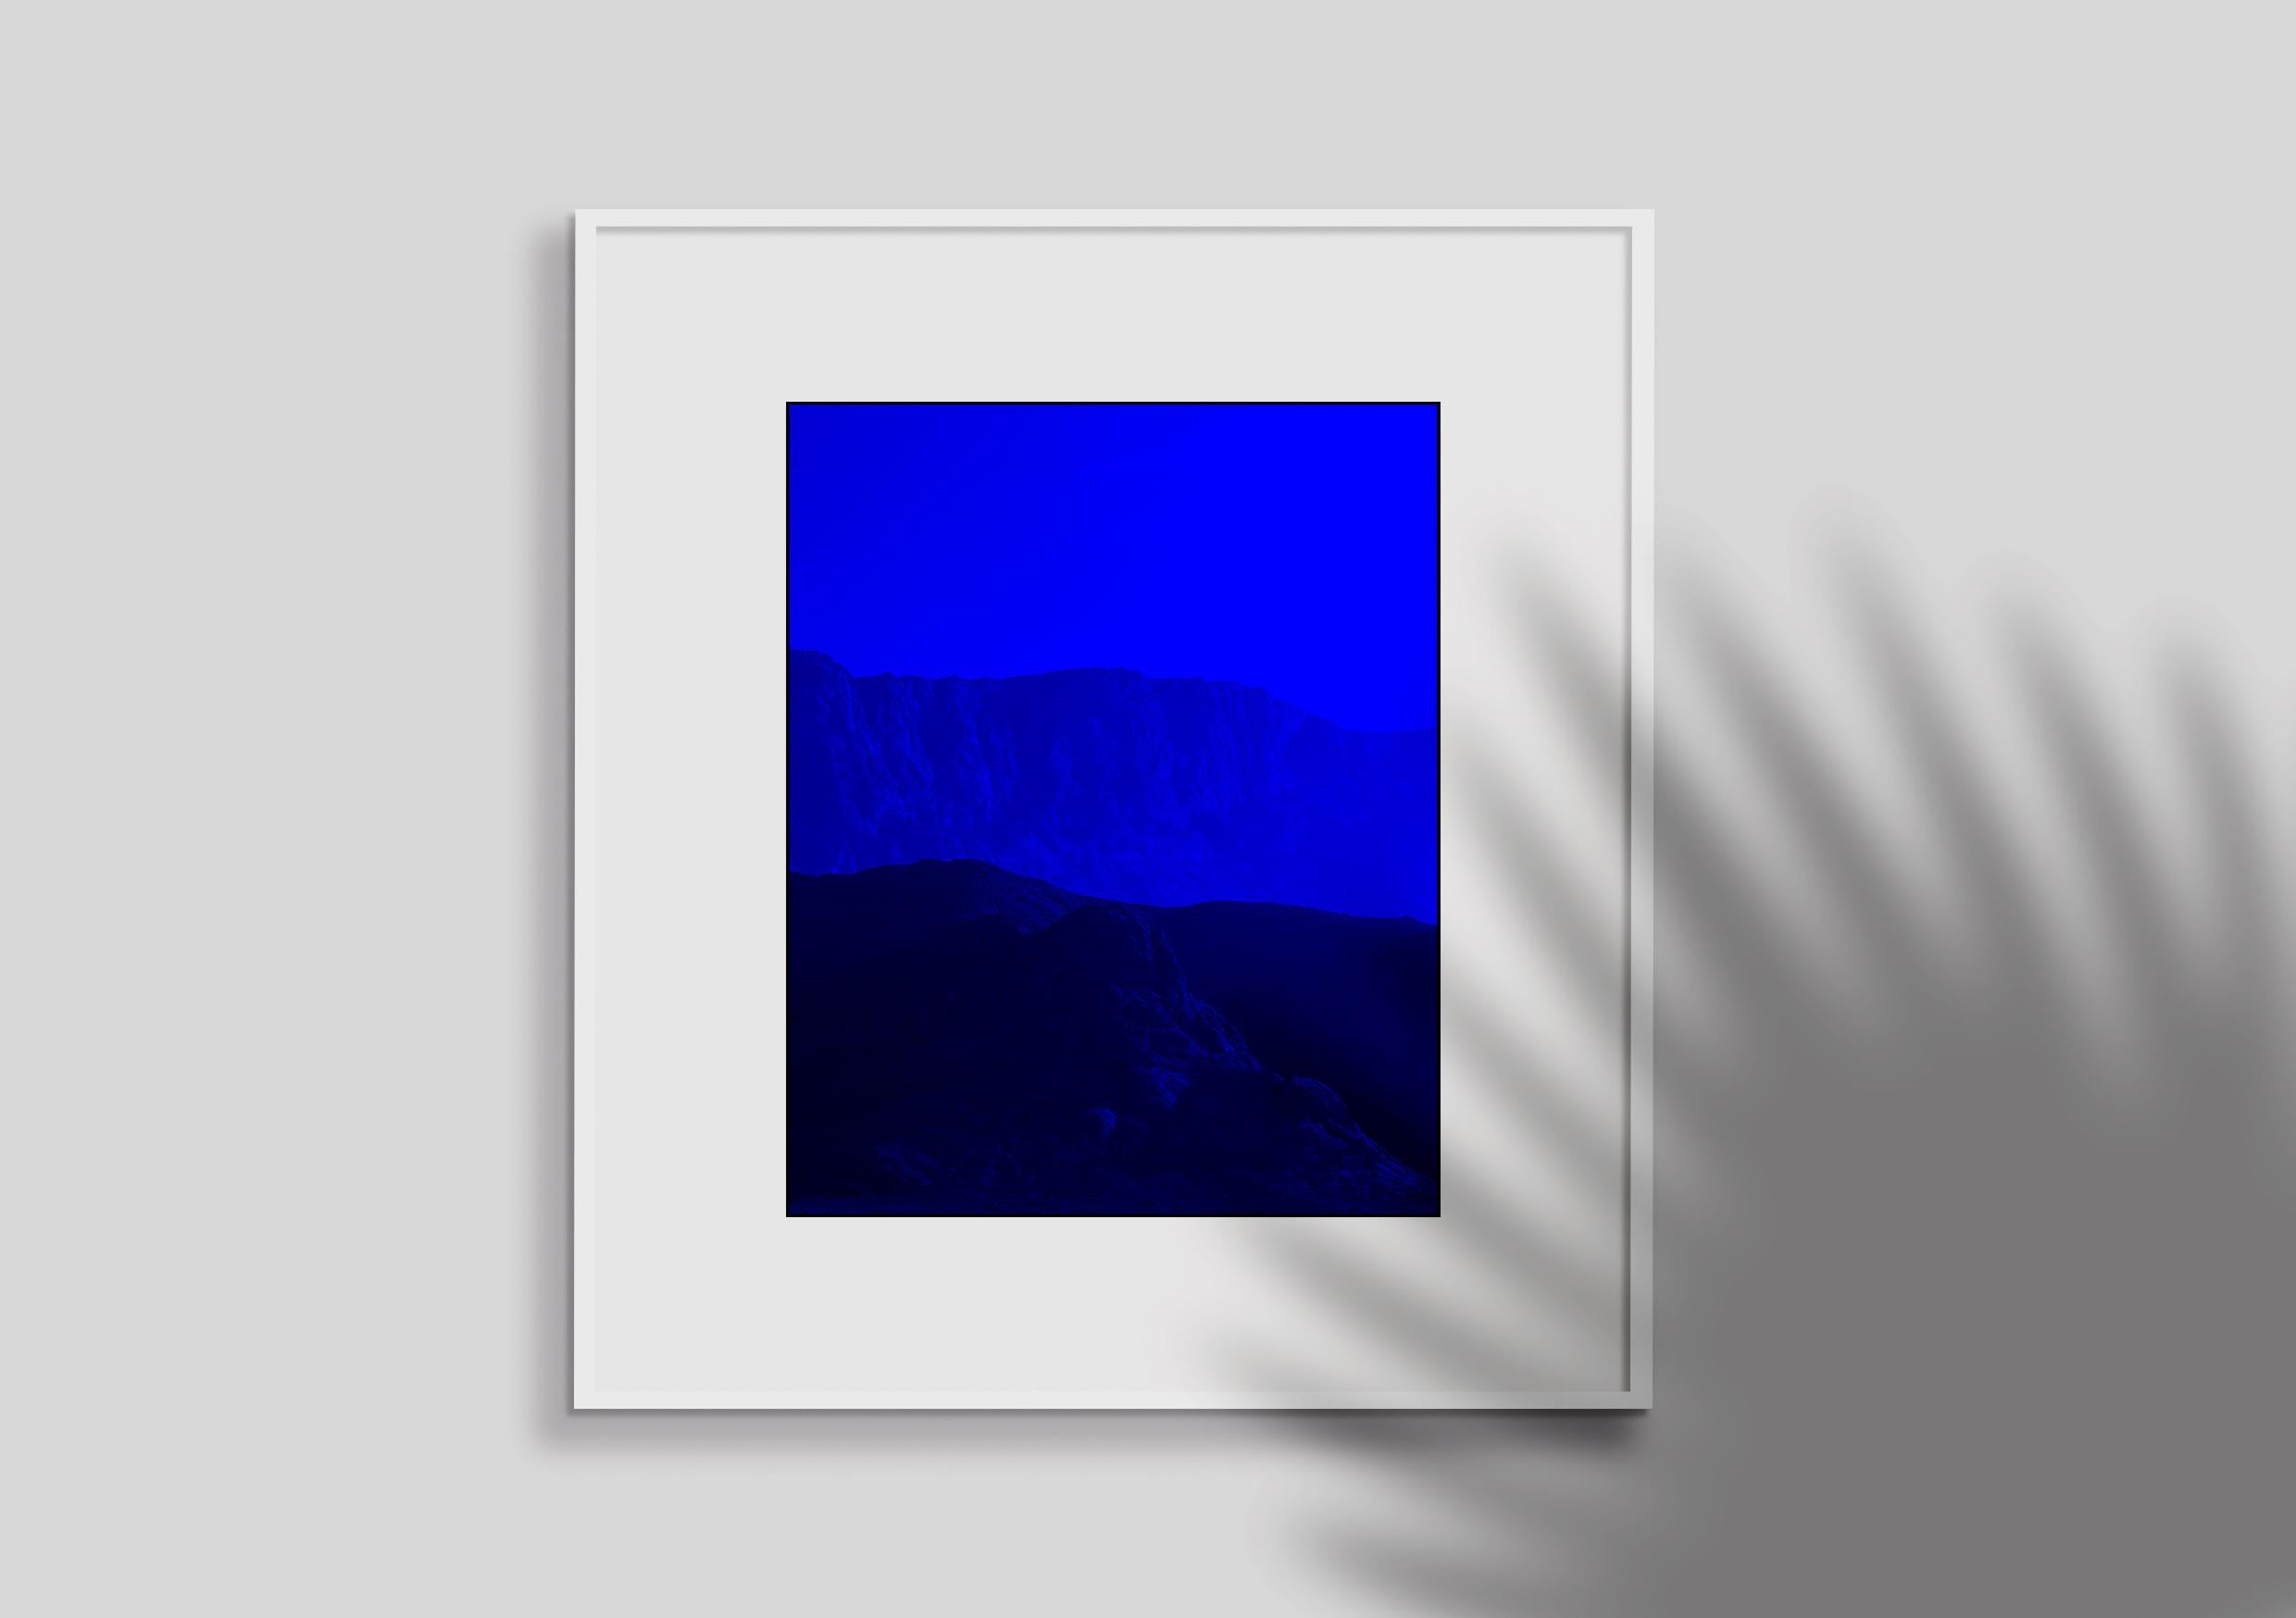 'Ultramarine hills' Ultramarine hills was photographed in Iran, 2016 with a combination of the special ultramarine colour filter. The idea of colour combination together with Iranian desert landscape came from encountering a local precious stone